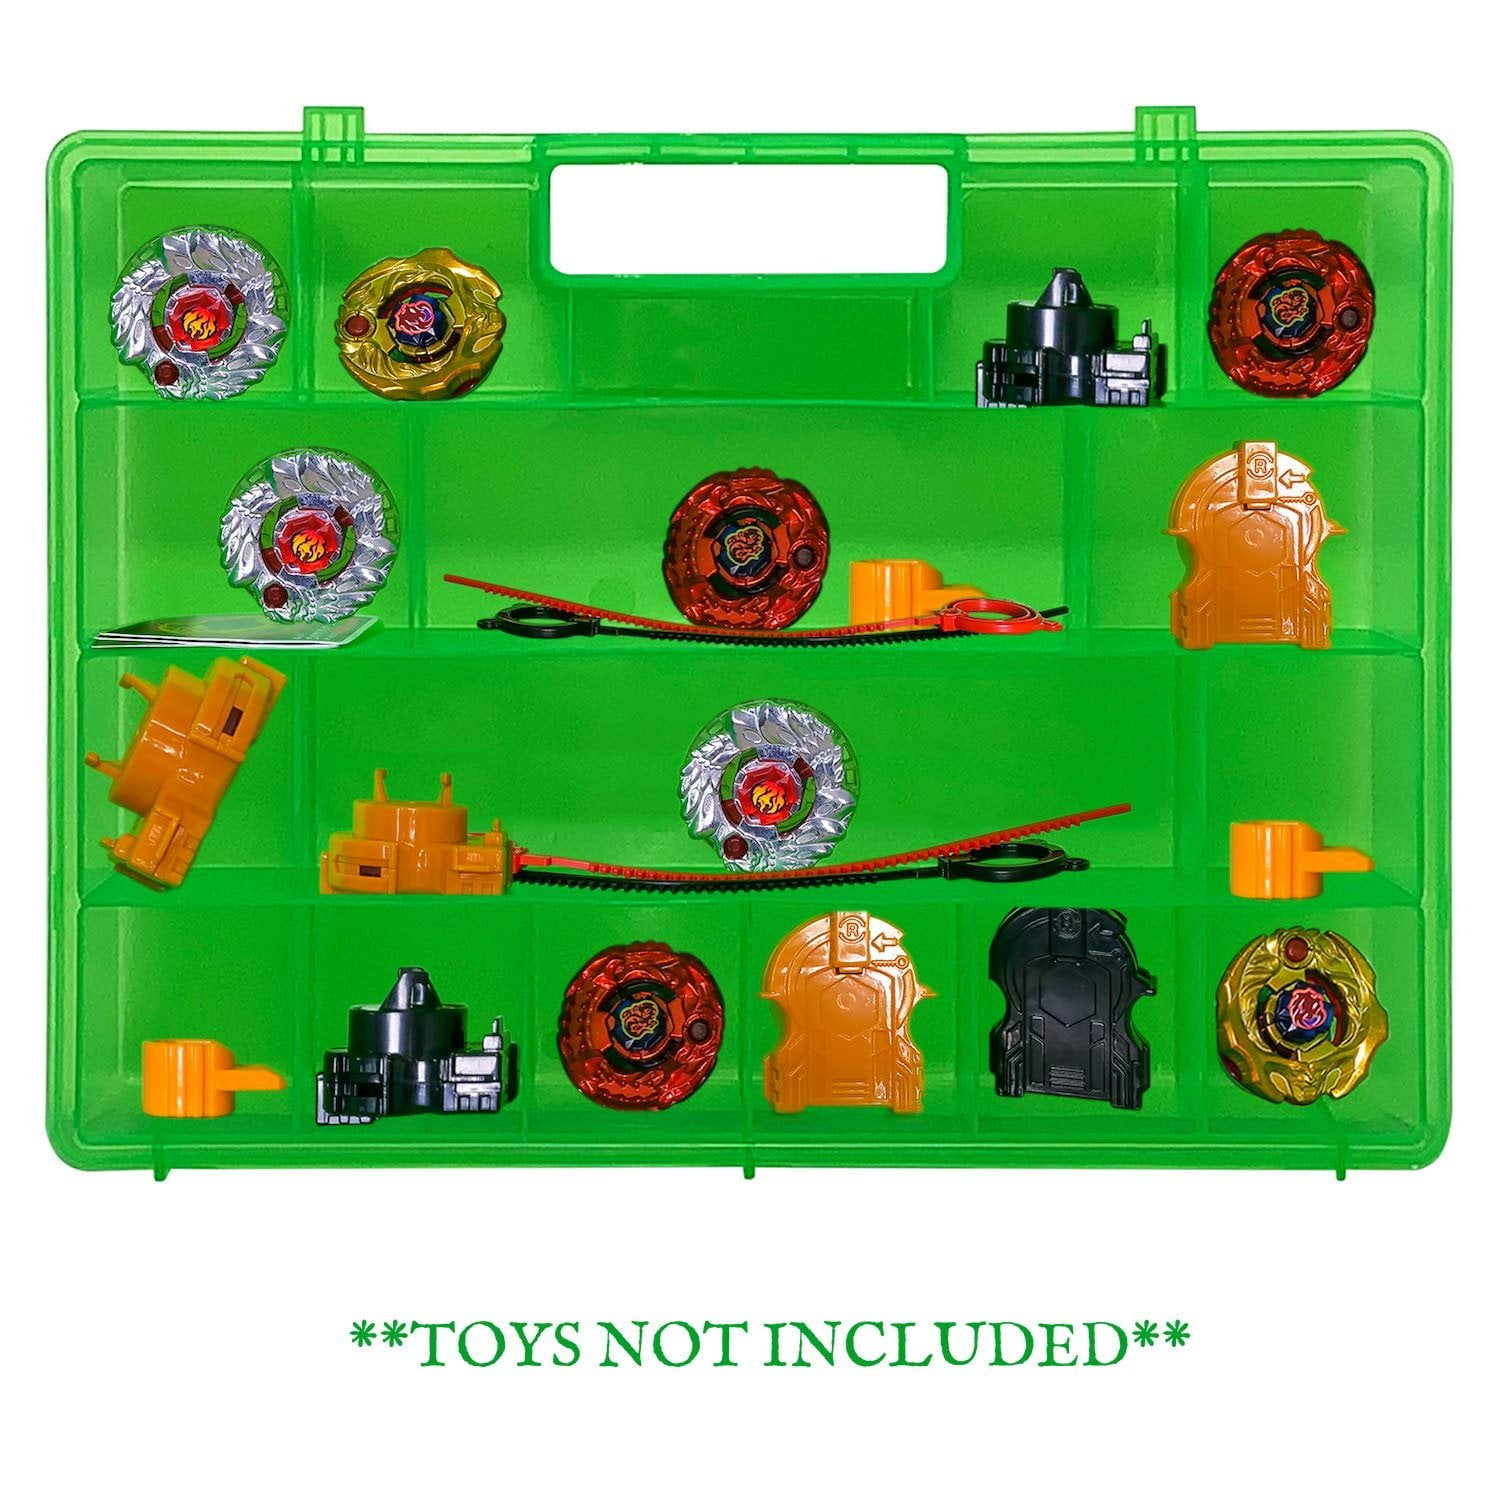 Beyblade Black Case Battle Box For Kids Multiple Storage Compartments Playset